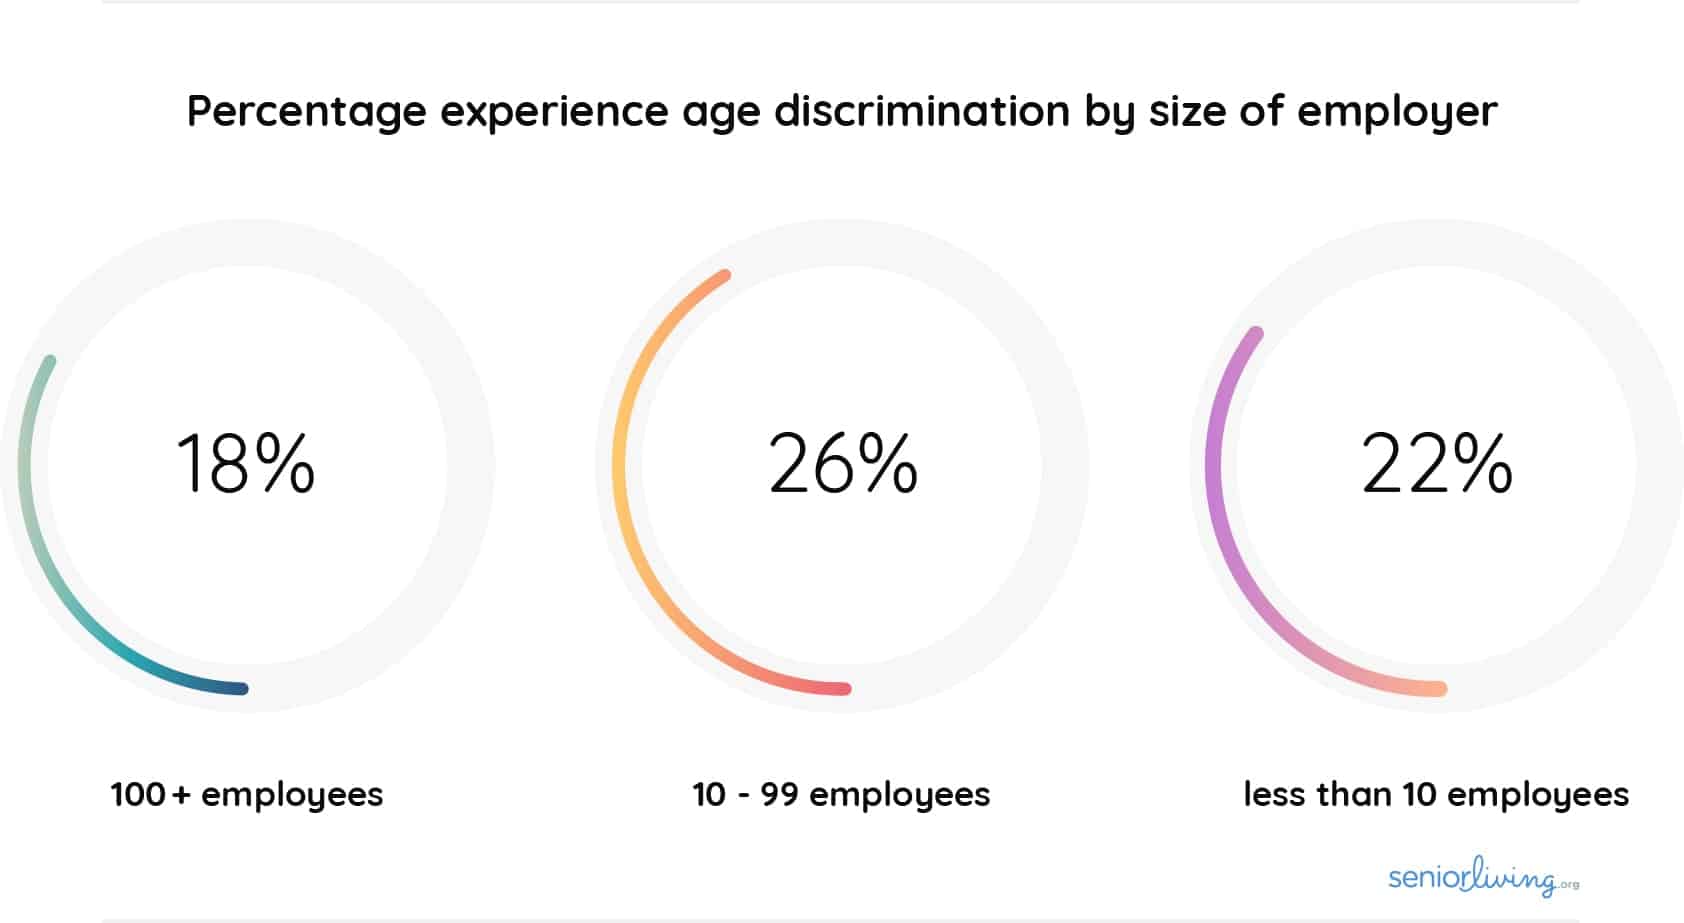 Percentage experience age discrimination by size of employer